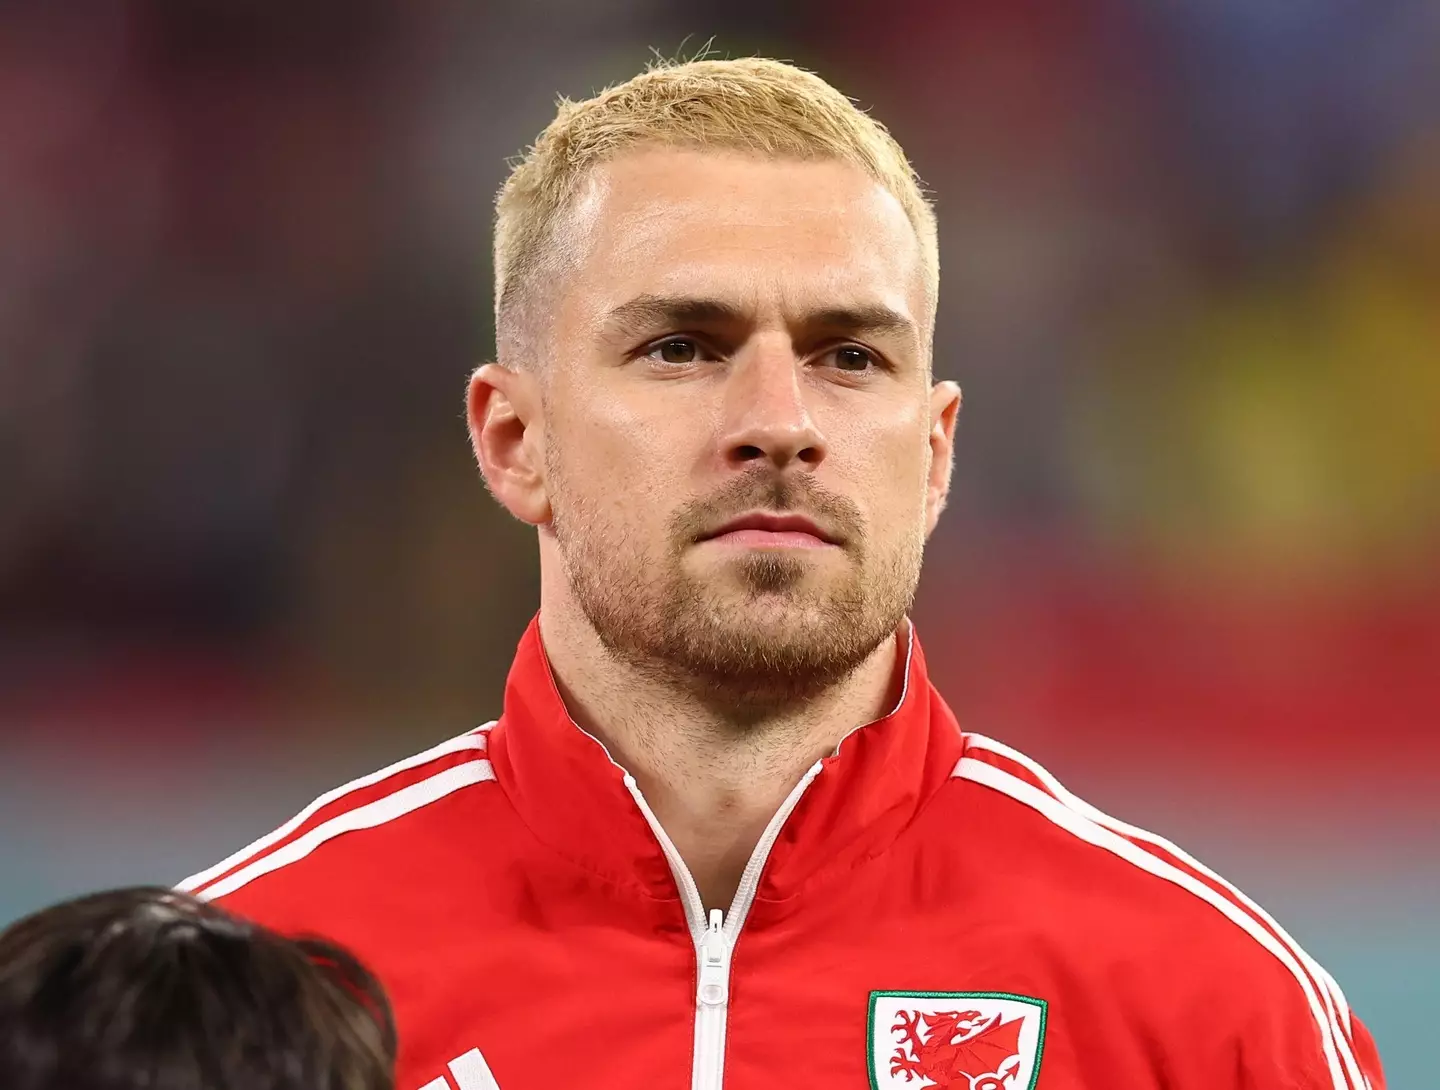 Ramsey during the World Cup. (Image